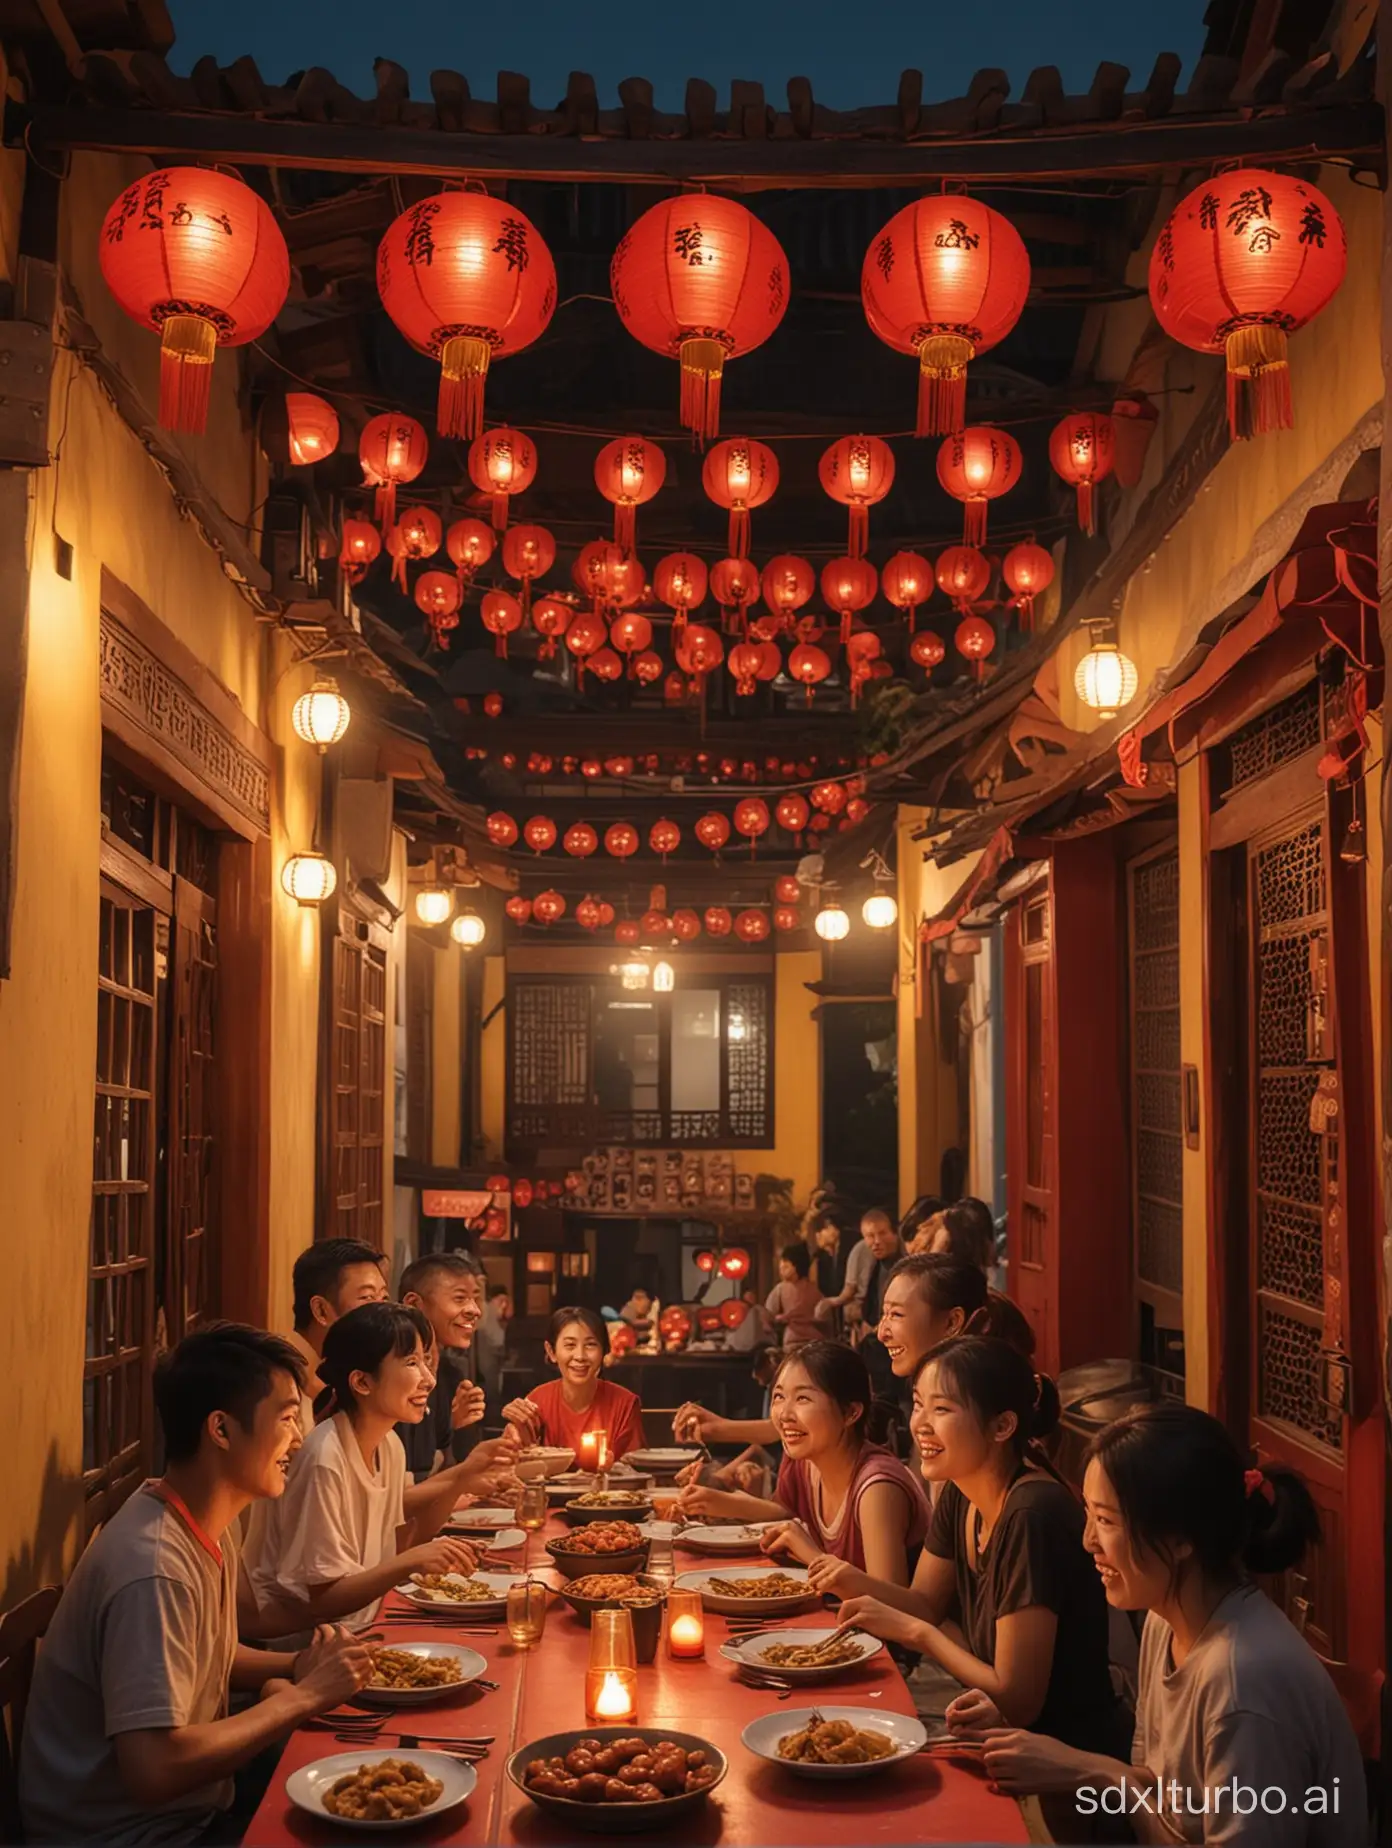 Asian-Family-Gathering-for-Retro-Dinner-in-Traditional-Courtyard-Setting